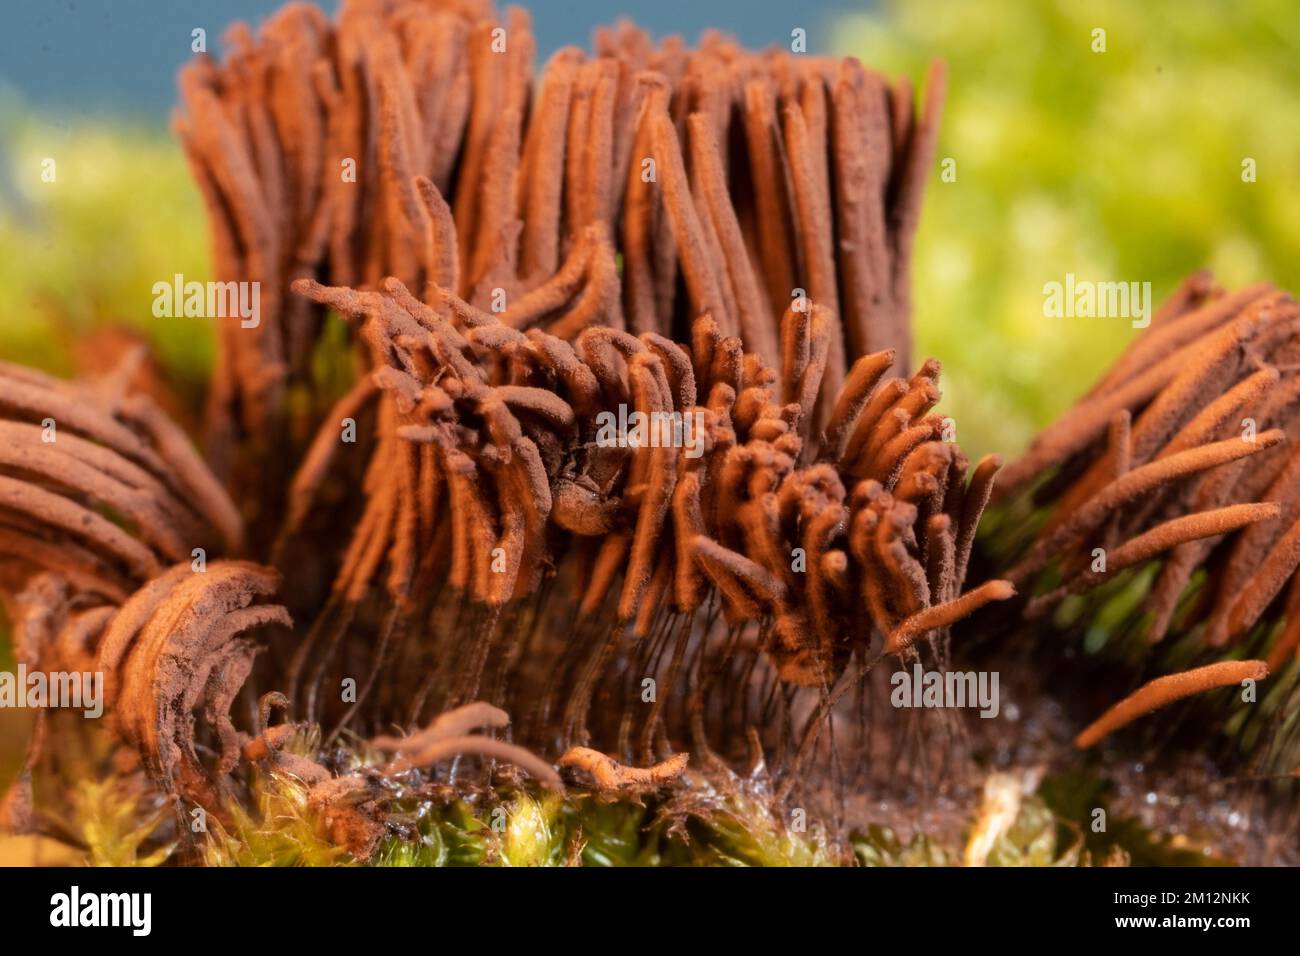 Tufted slime mould Fruiting body with many light brown stalks Stock Photo